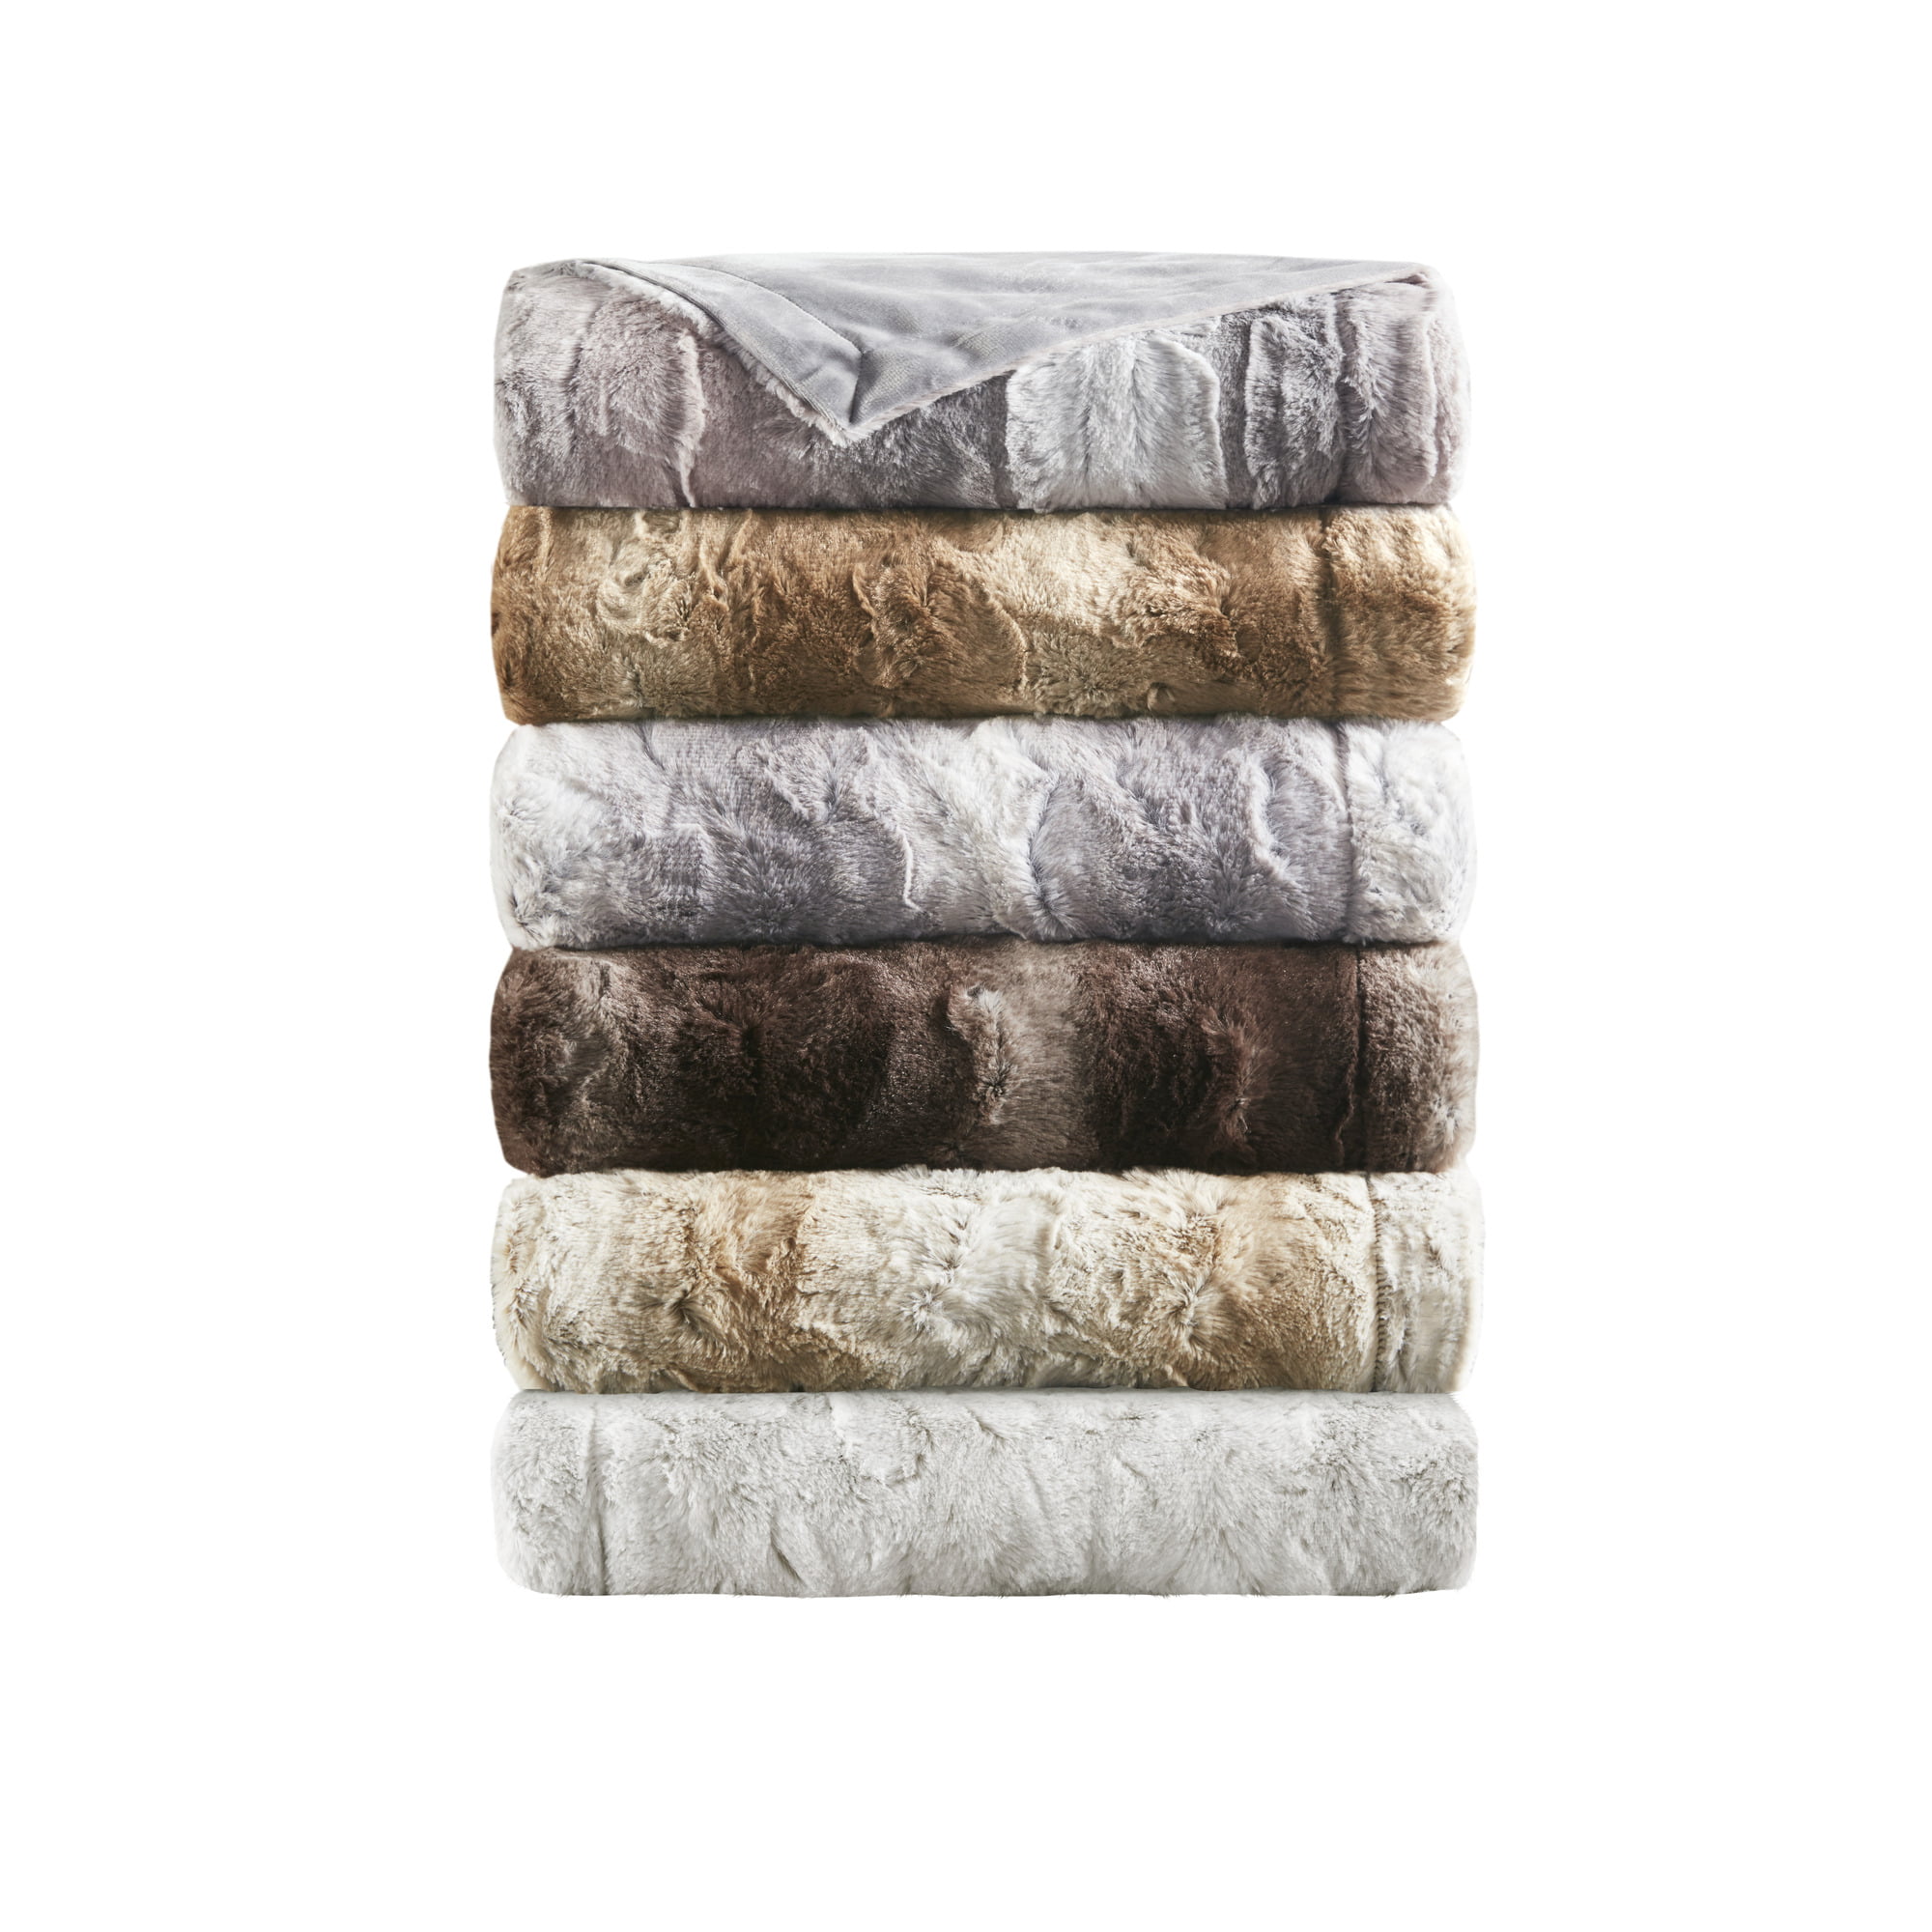 QiyI Agrigento Sicily Famous Valle Dei Templi Cozy All Season Couch Blanket Velvet Throw Fluffy Blankets Soft Warm Cozy Cashmere Throws and Blankets for Sofa Soft Decorative 